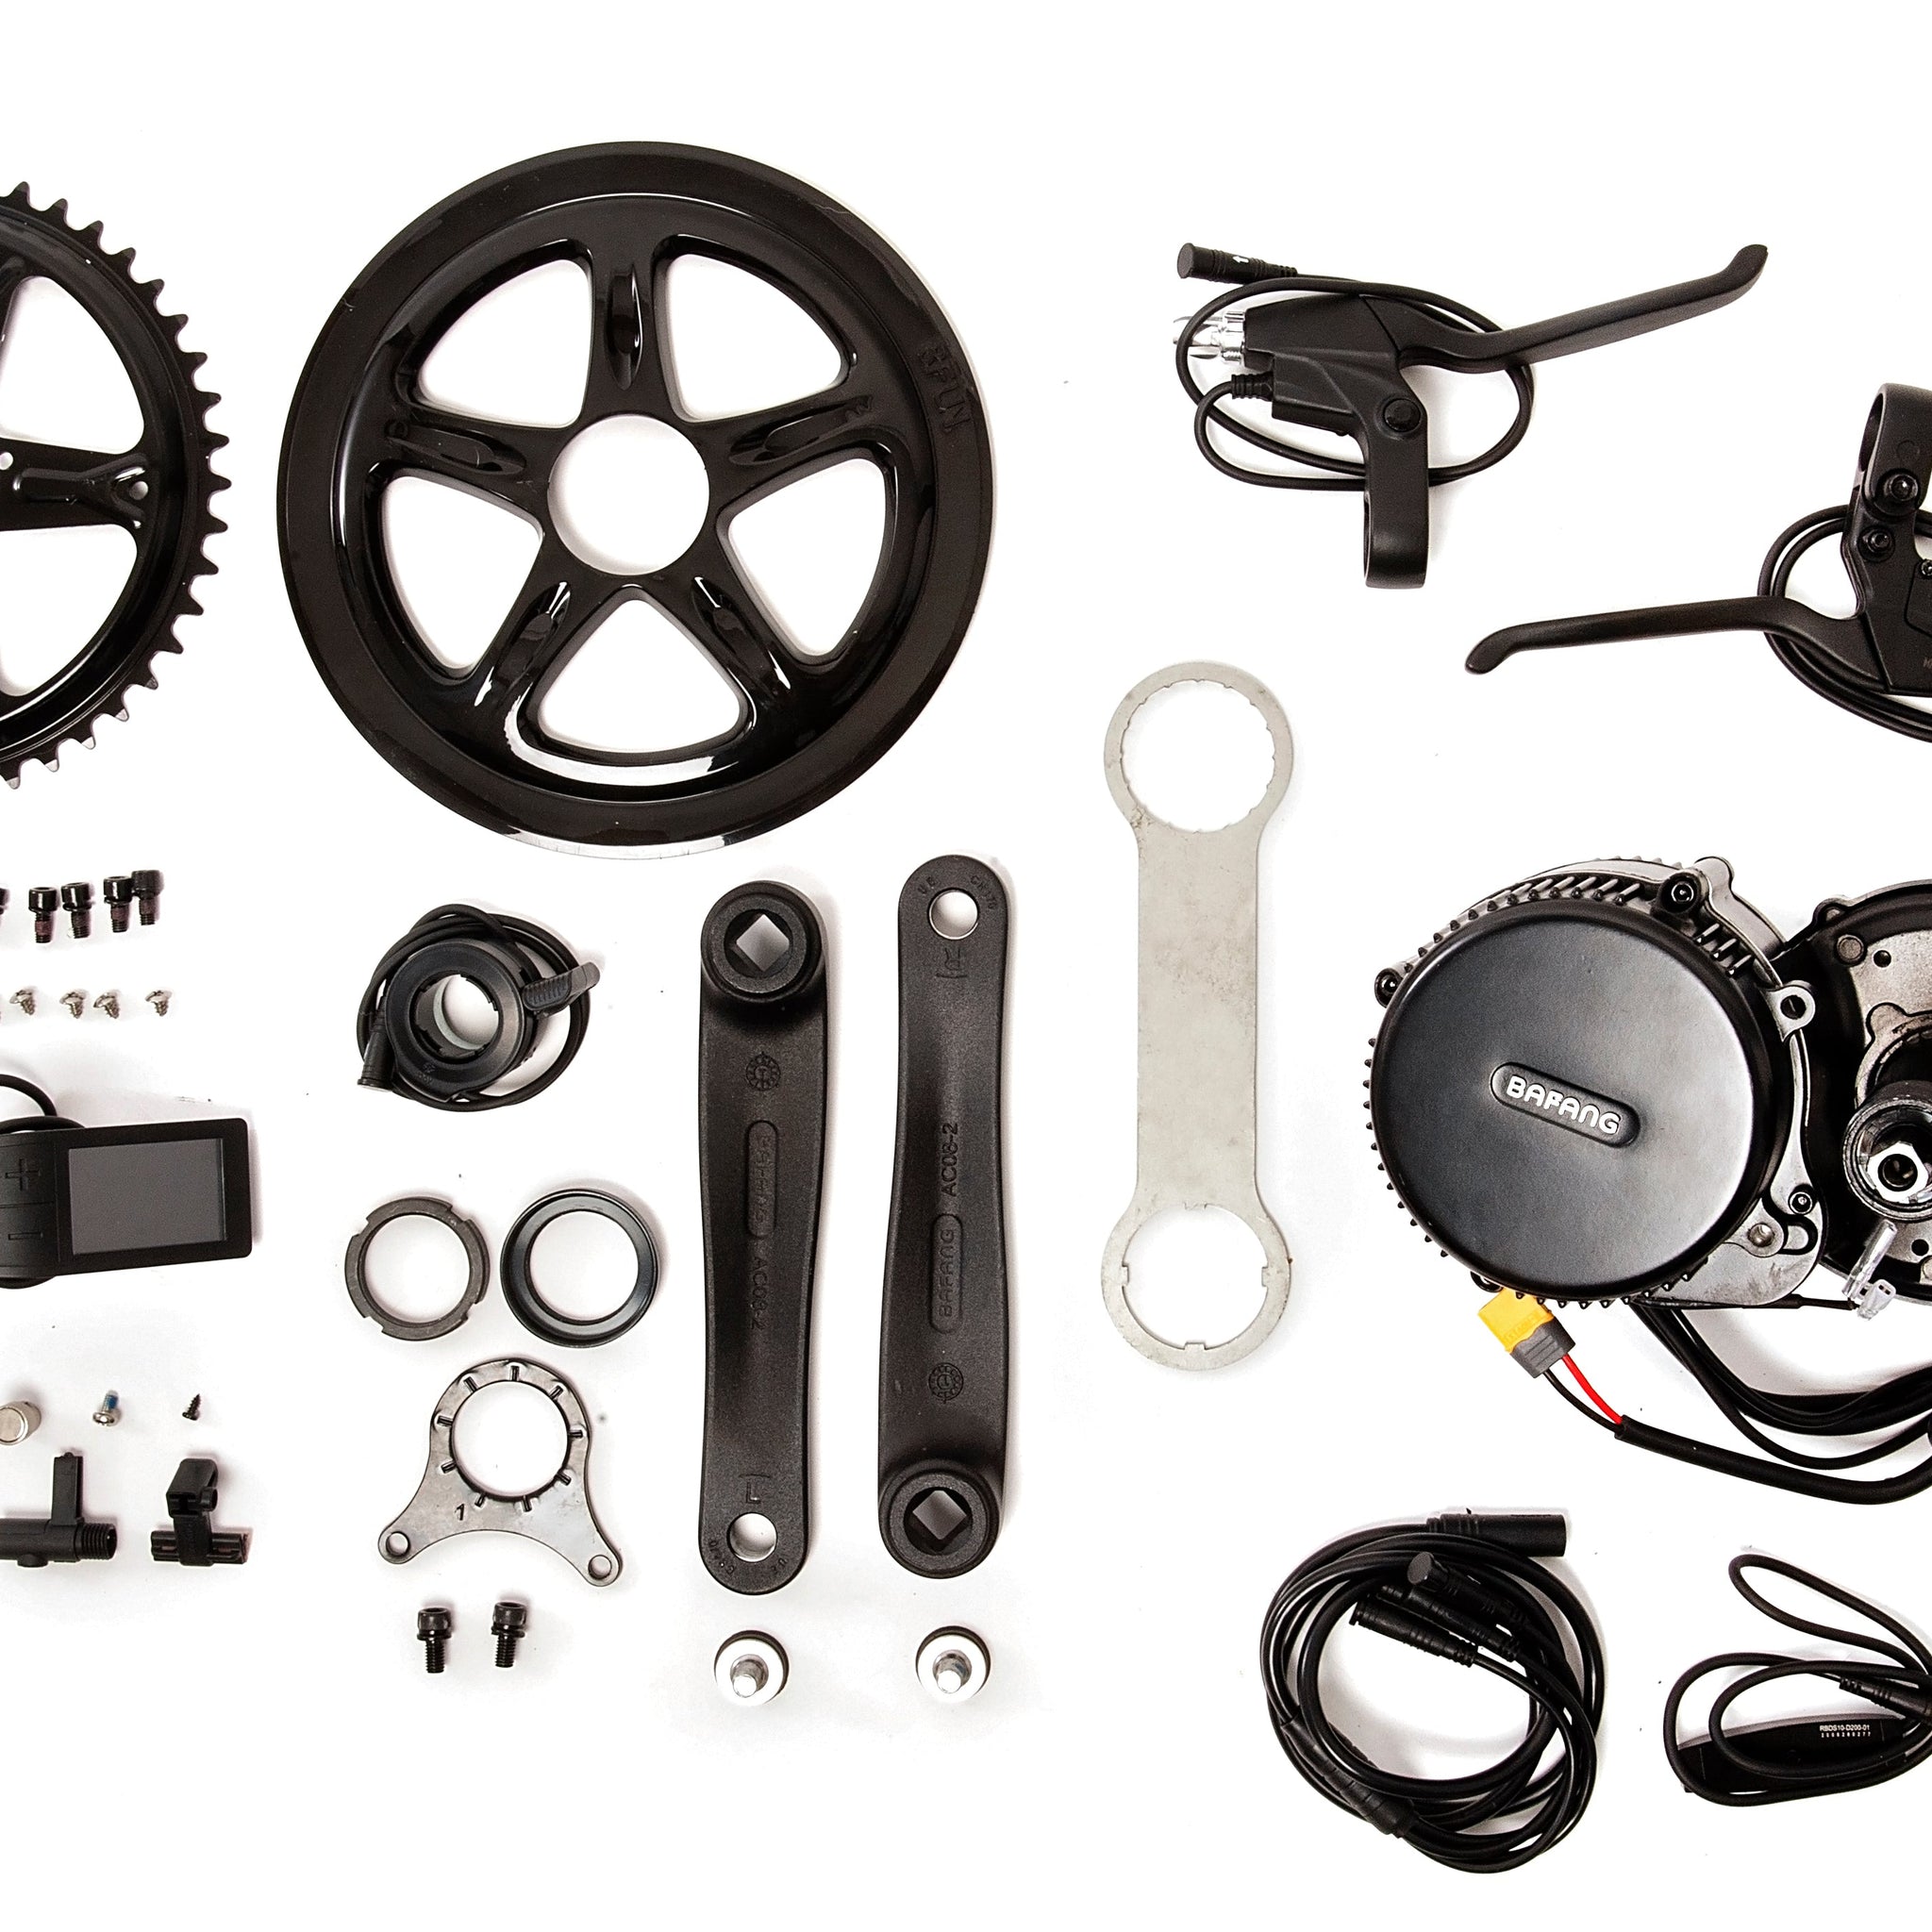 Bafang BBS02 mid drive motor parts and tools for eBike conversion kit laid out on white background